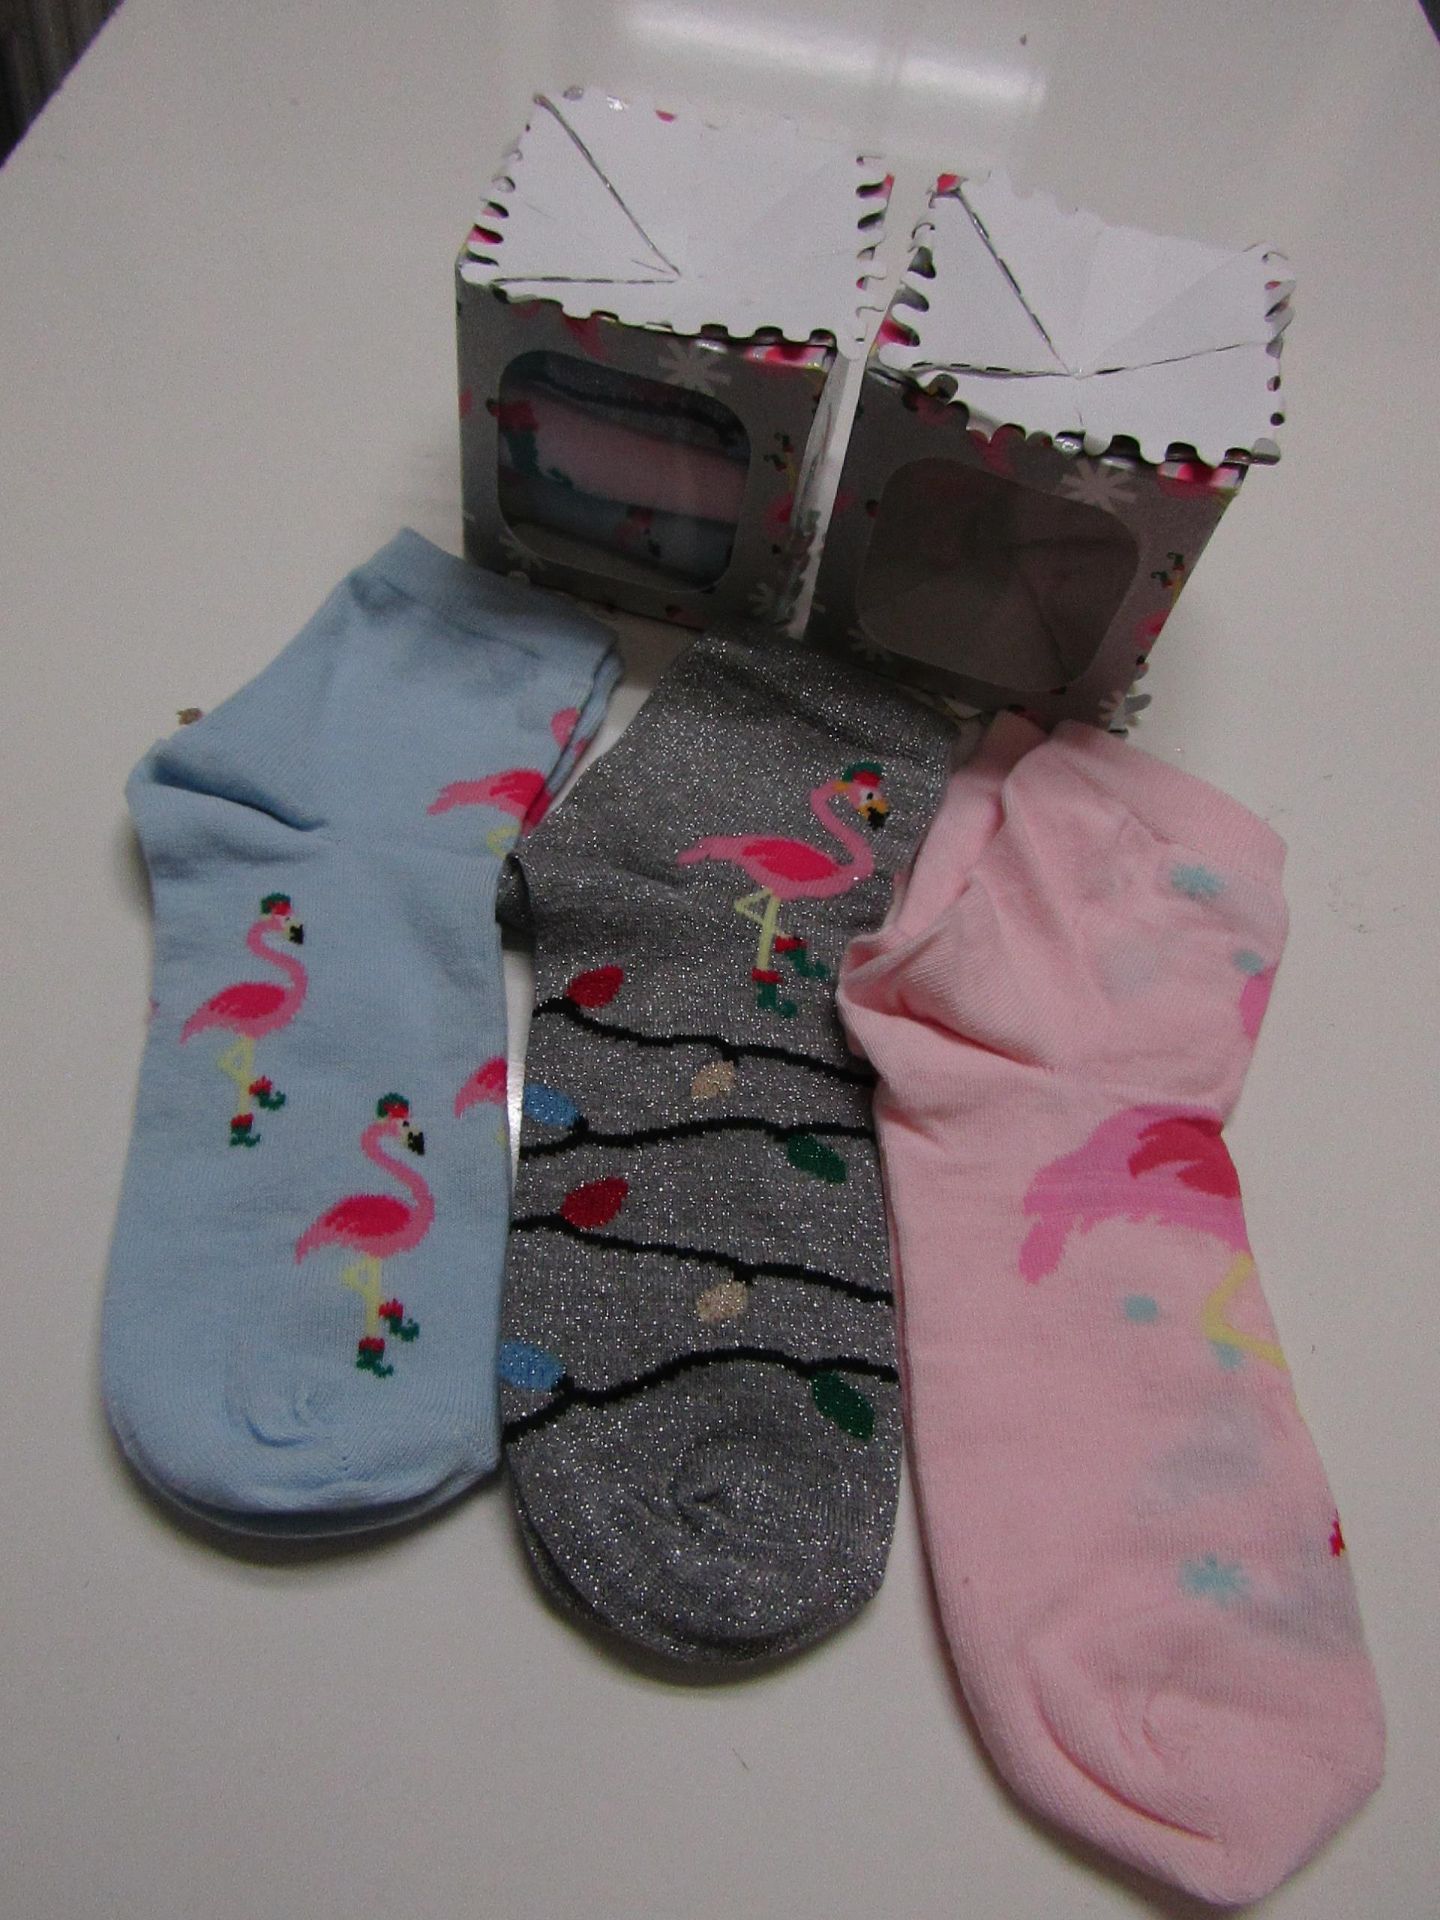 2 X Boxes of 3 Pairs of Ladies Fashion Socks Box Says One Size Approx 4-6 New & Boxed